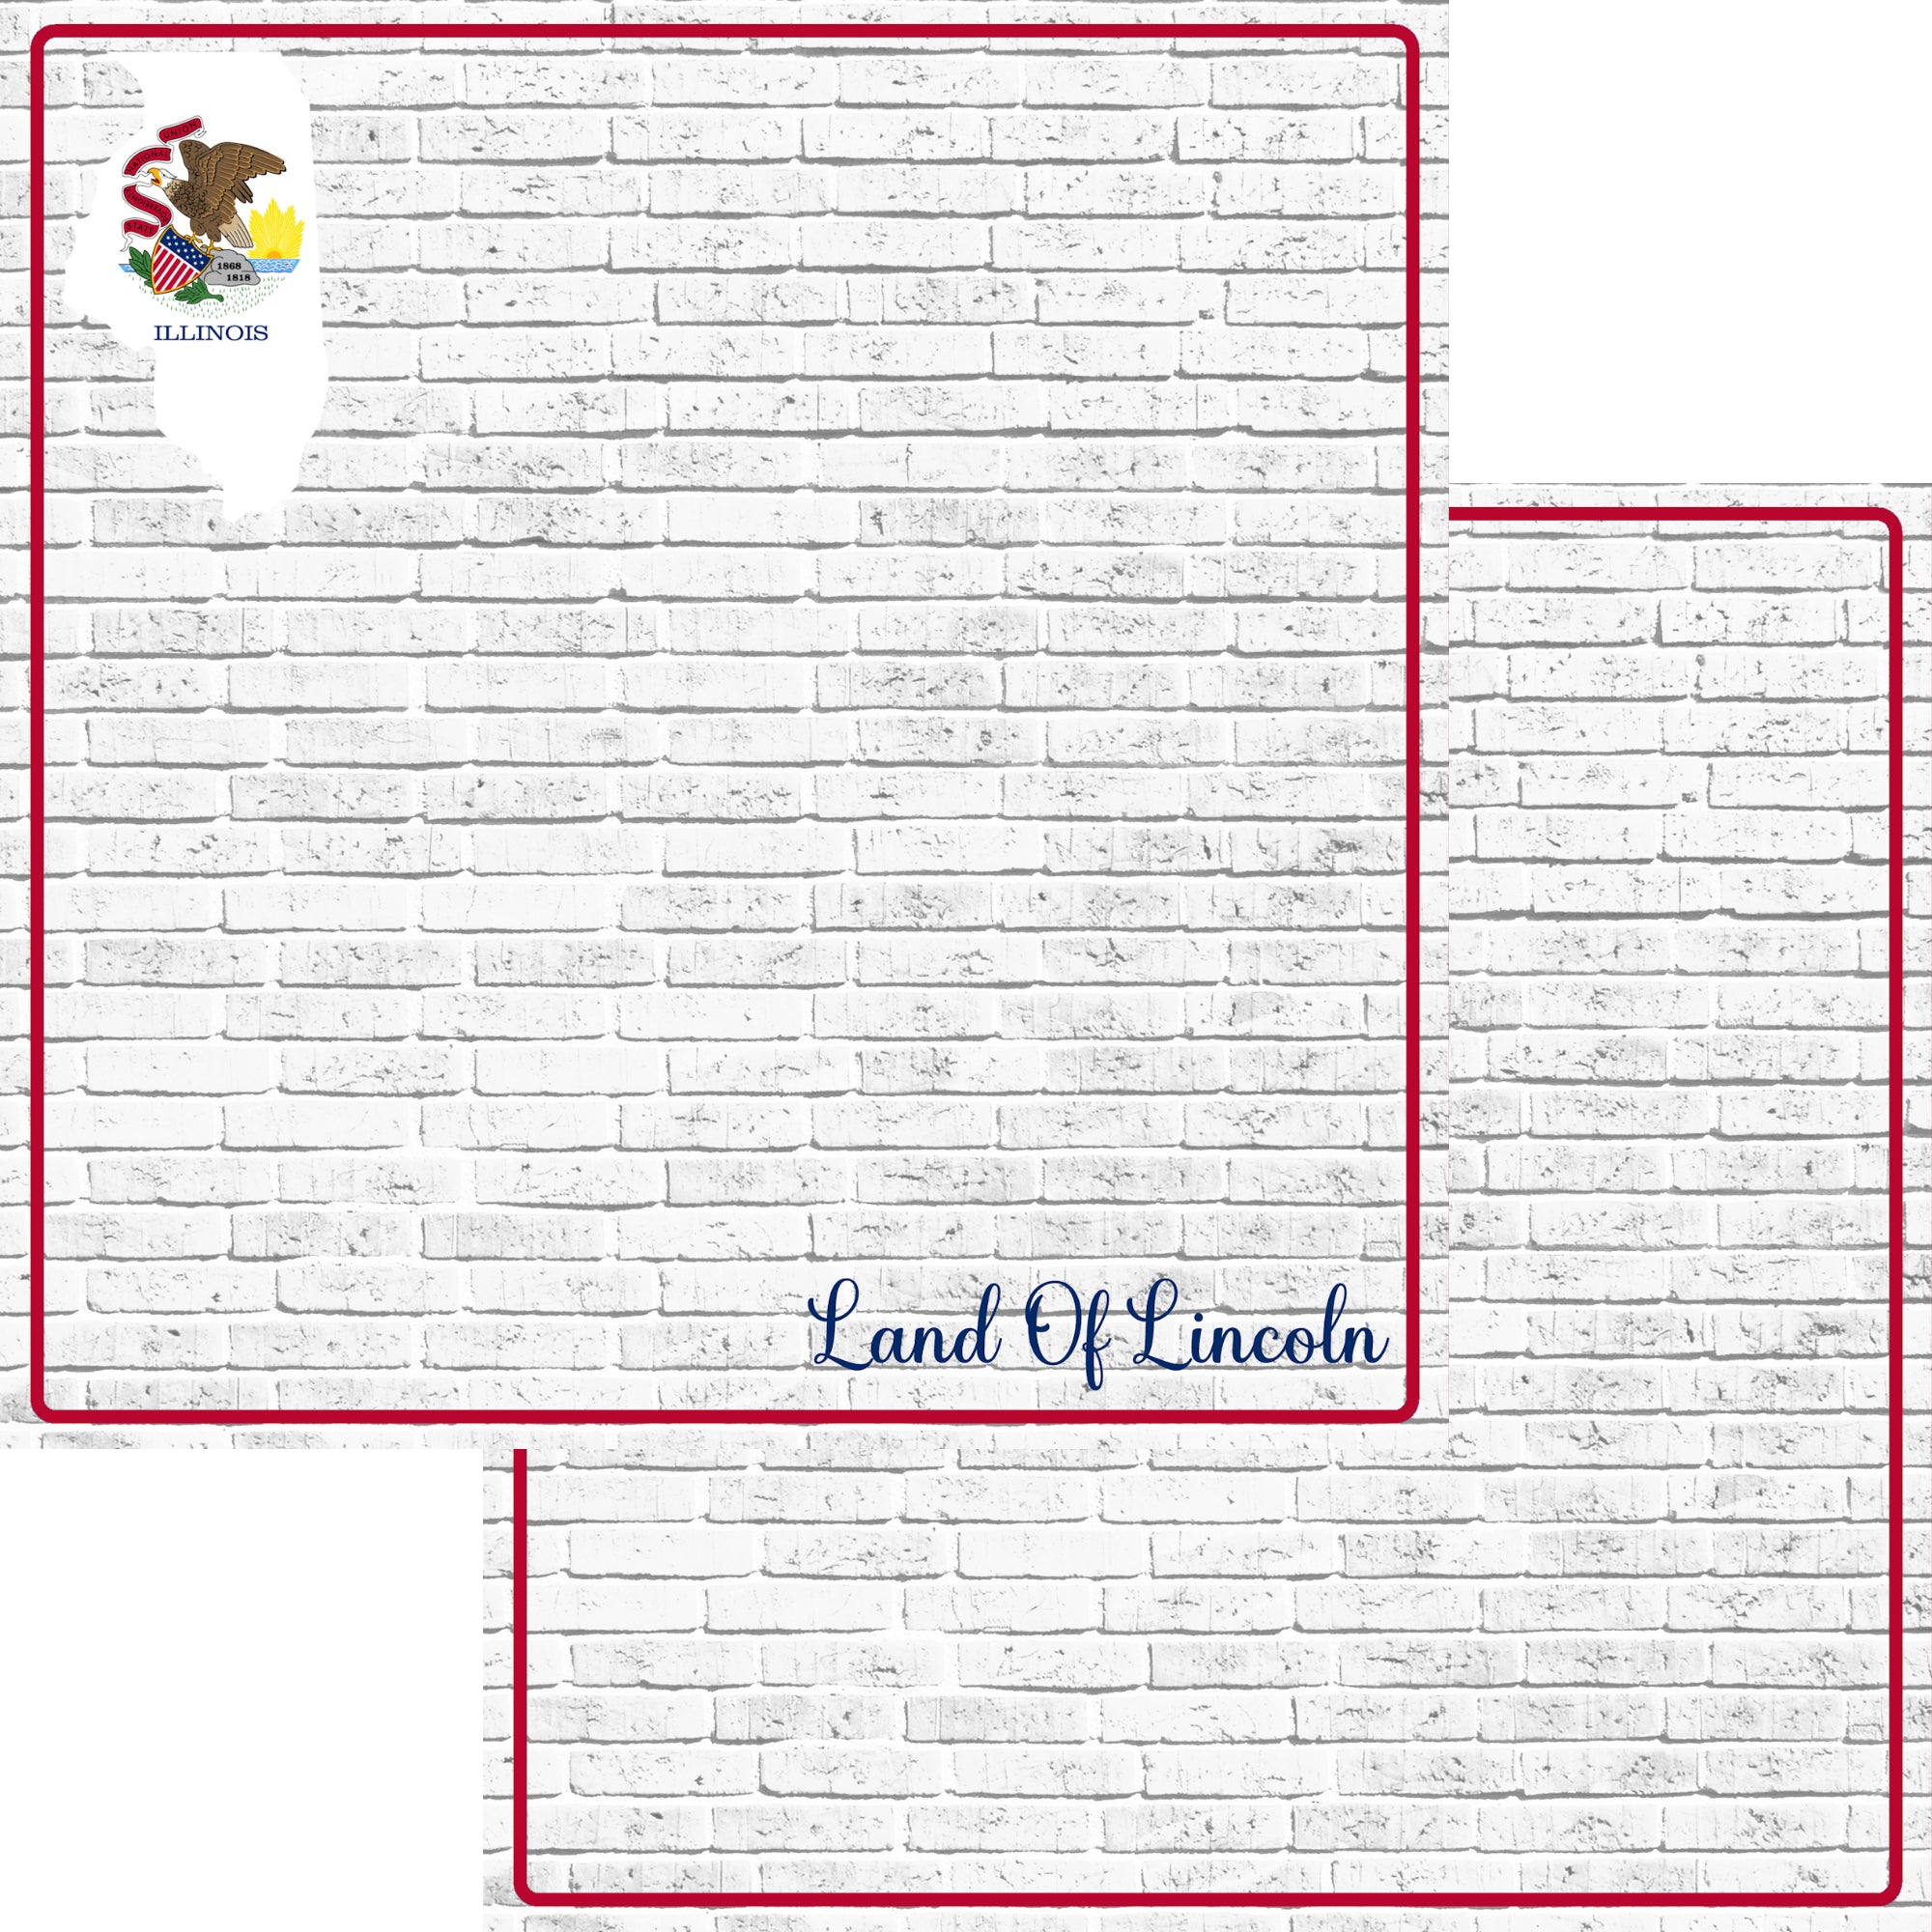 Fifty States Collection Illinois 12 x 12 Double-Sided Scrapbook Paper by SSC Designs